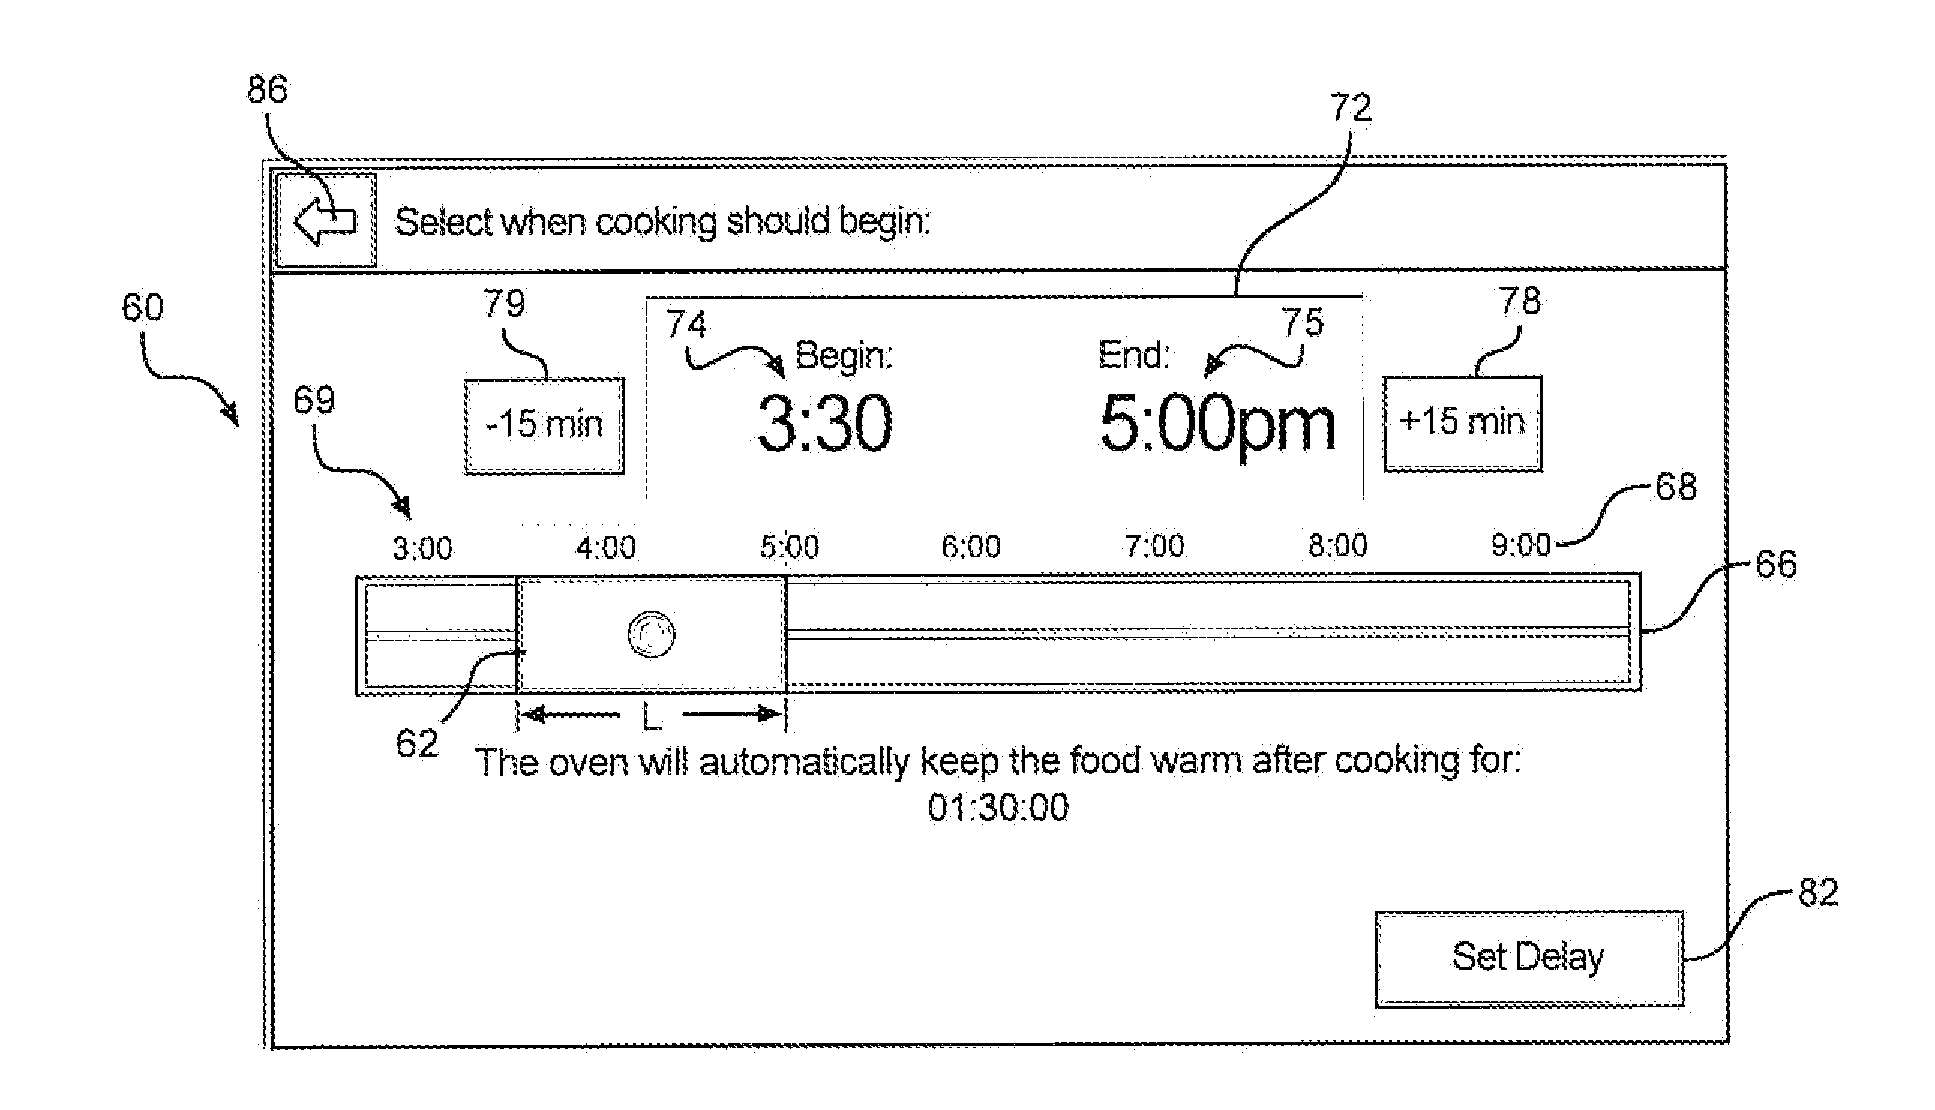 Sliding control system for a cooking appliance